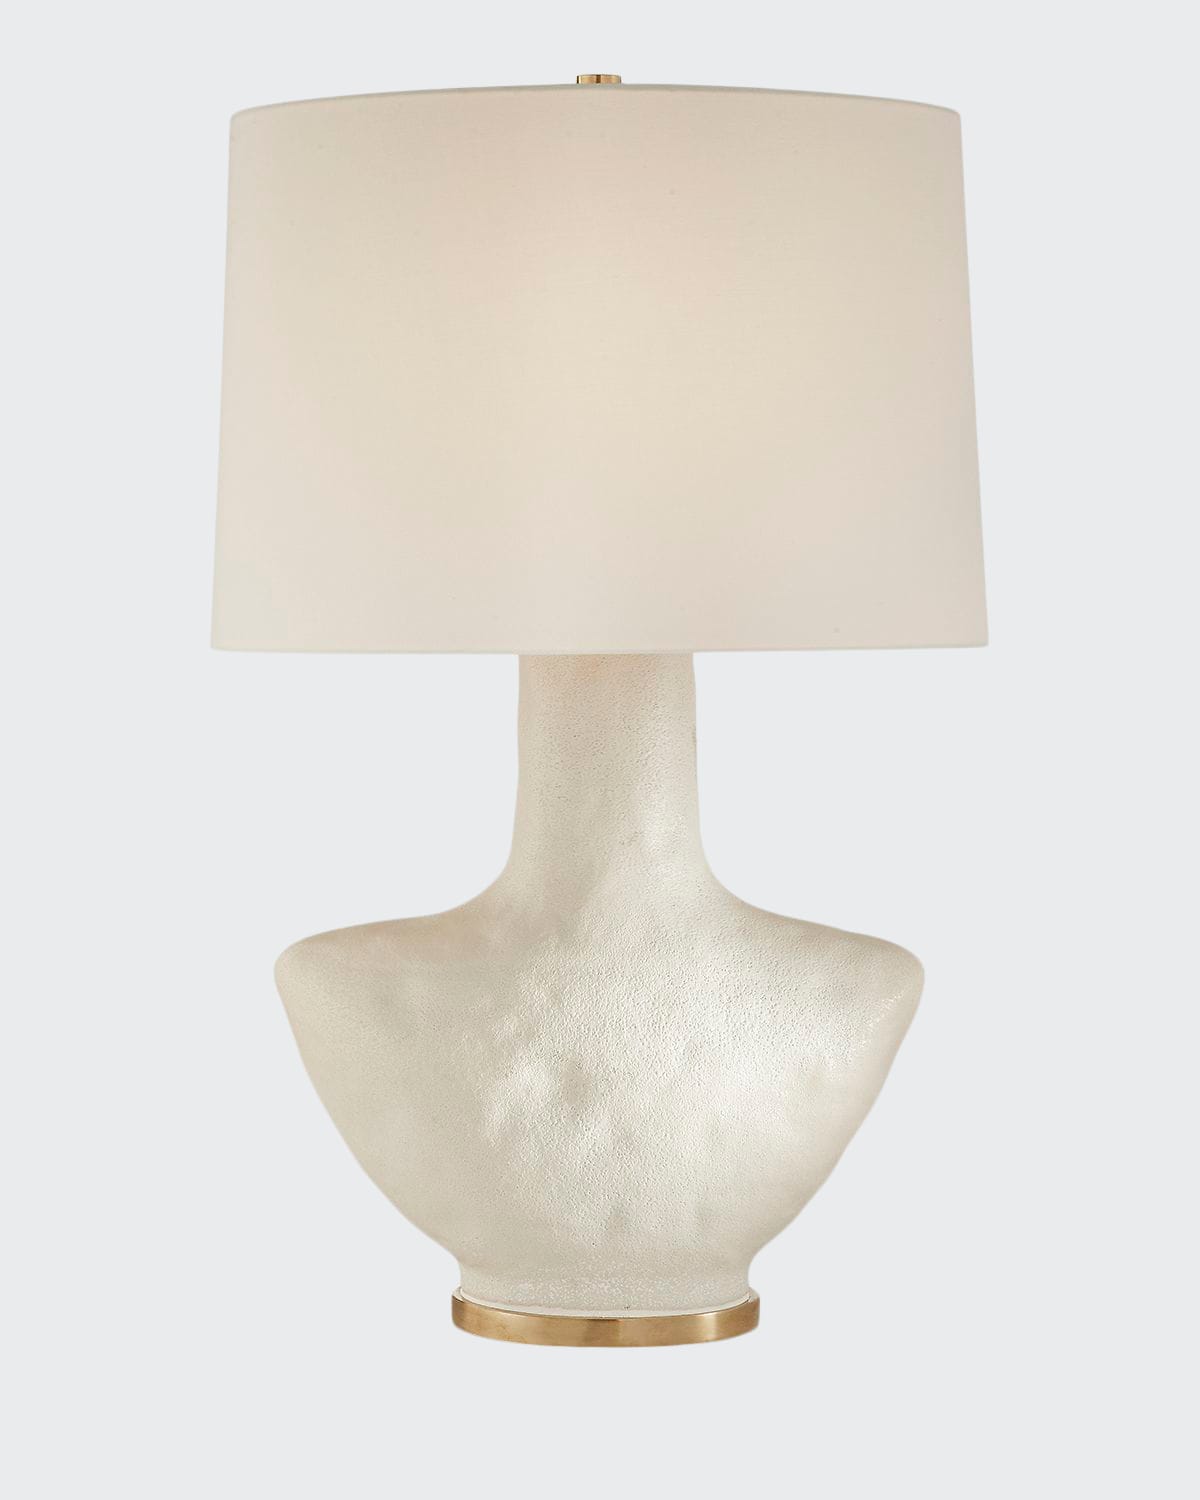 Kelly Wearstler For Visual Comfort Signature Armato Small Table Lamp In Ivory